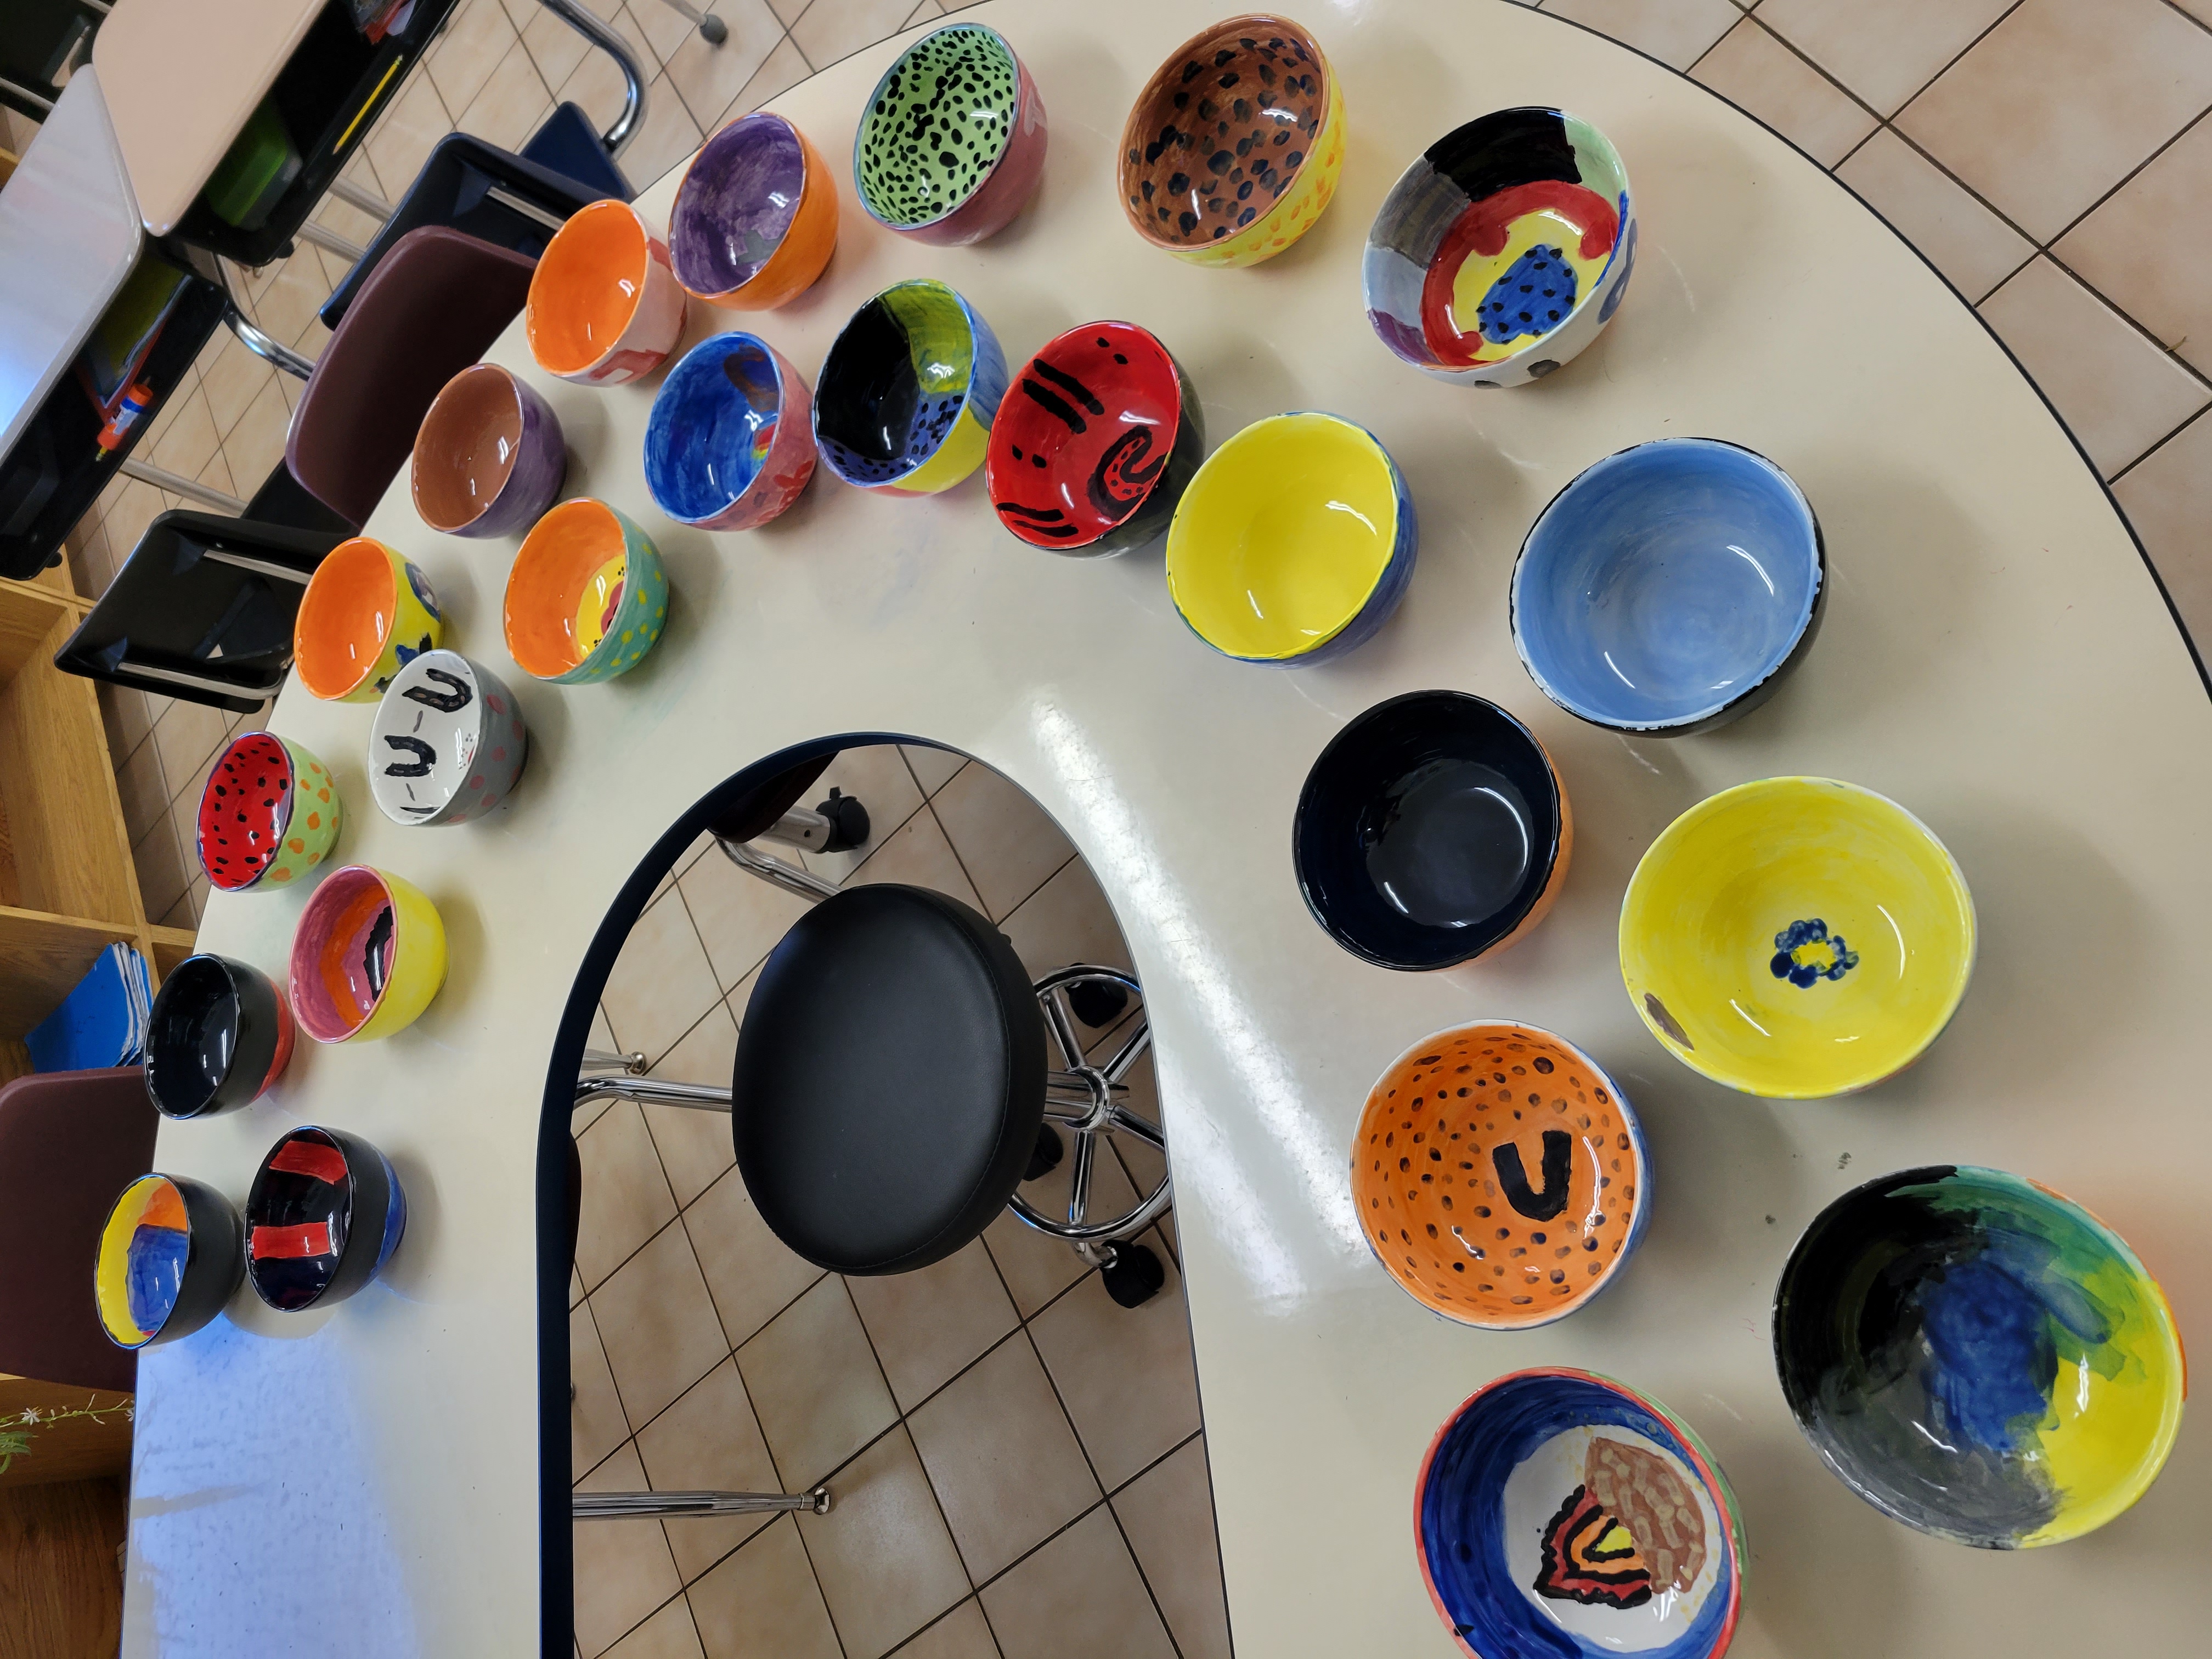 A round desk with a stool in the middle. On the desk are 26 multicolour bowls, student pottery projects.